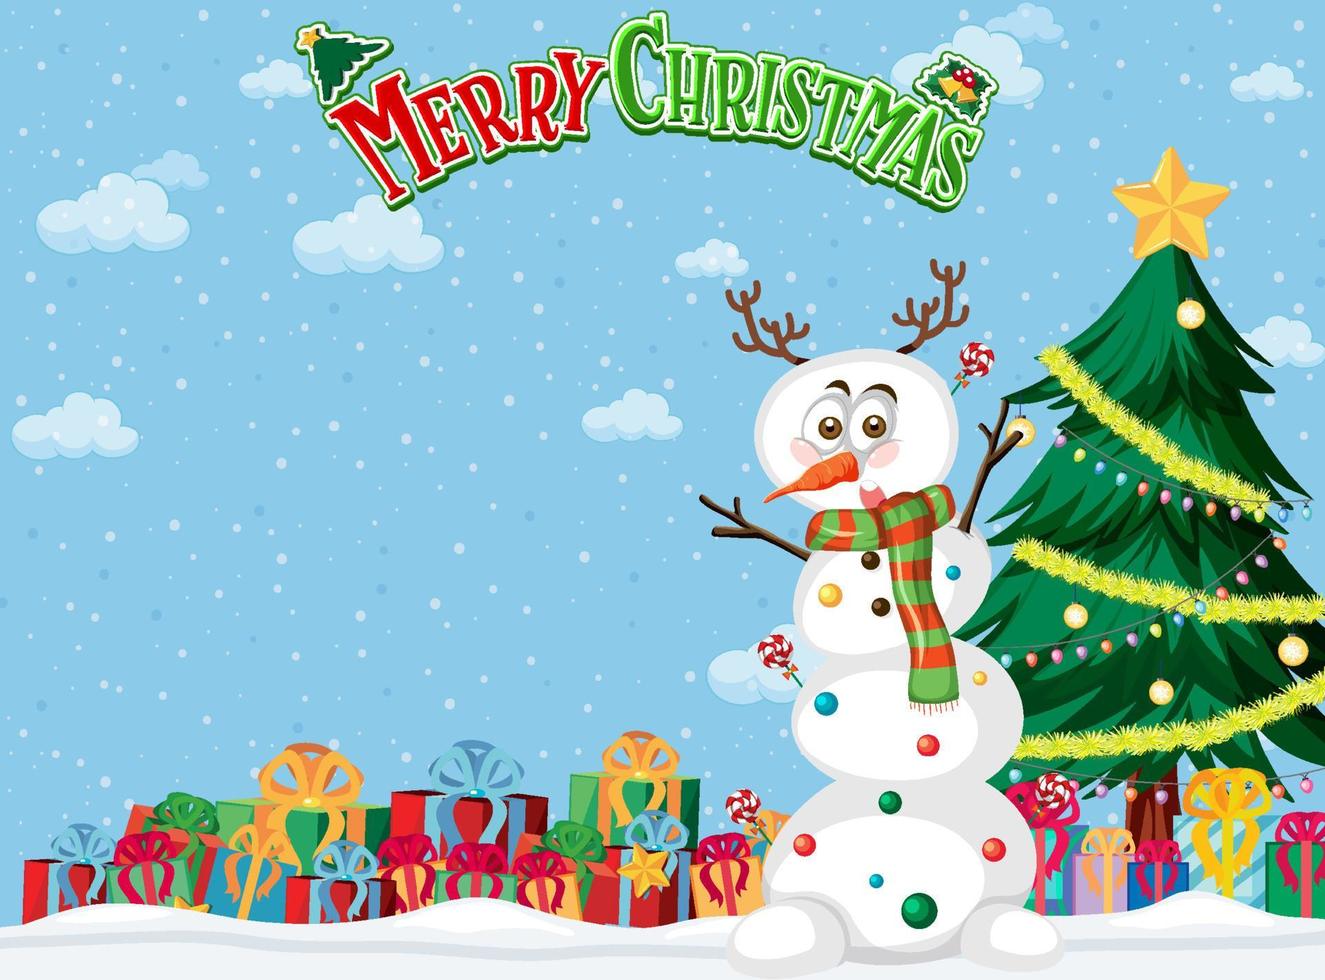 Merry Christmas poster with cute snowman and tree vector